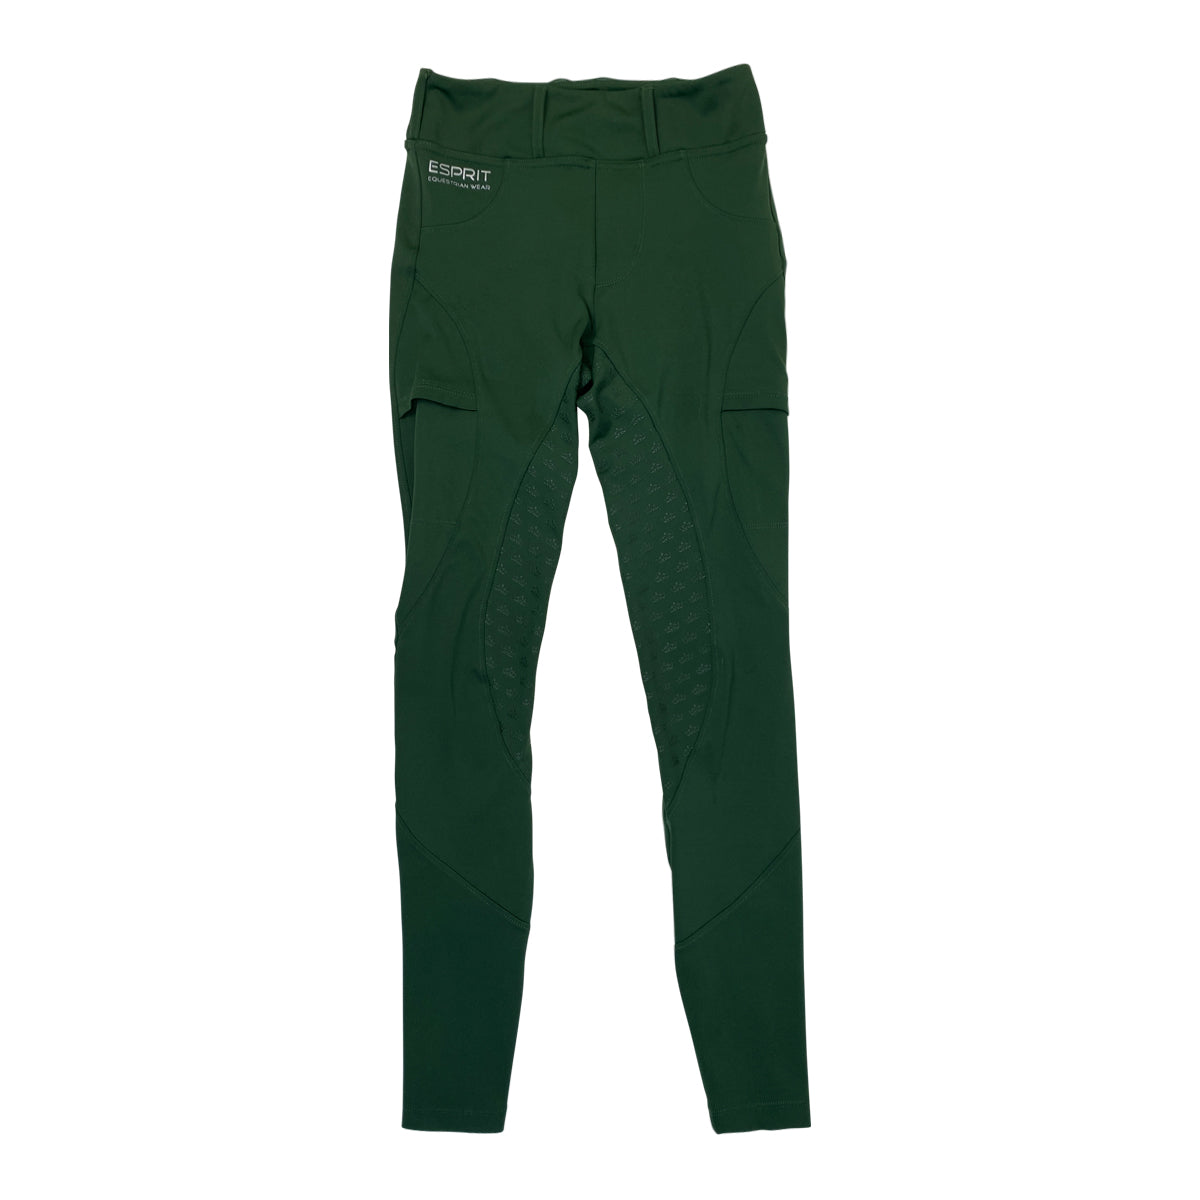 Esprit Equestrian 'Classic' Full Seat Riding Tights in Green